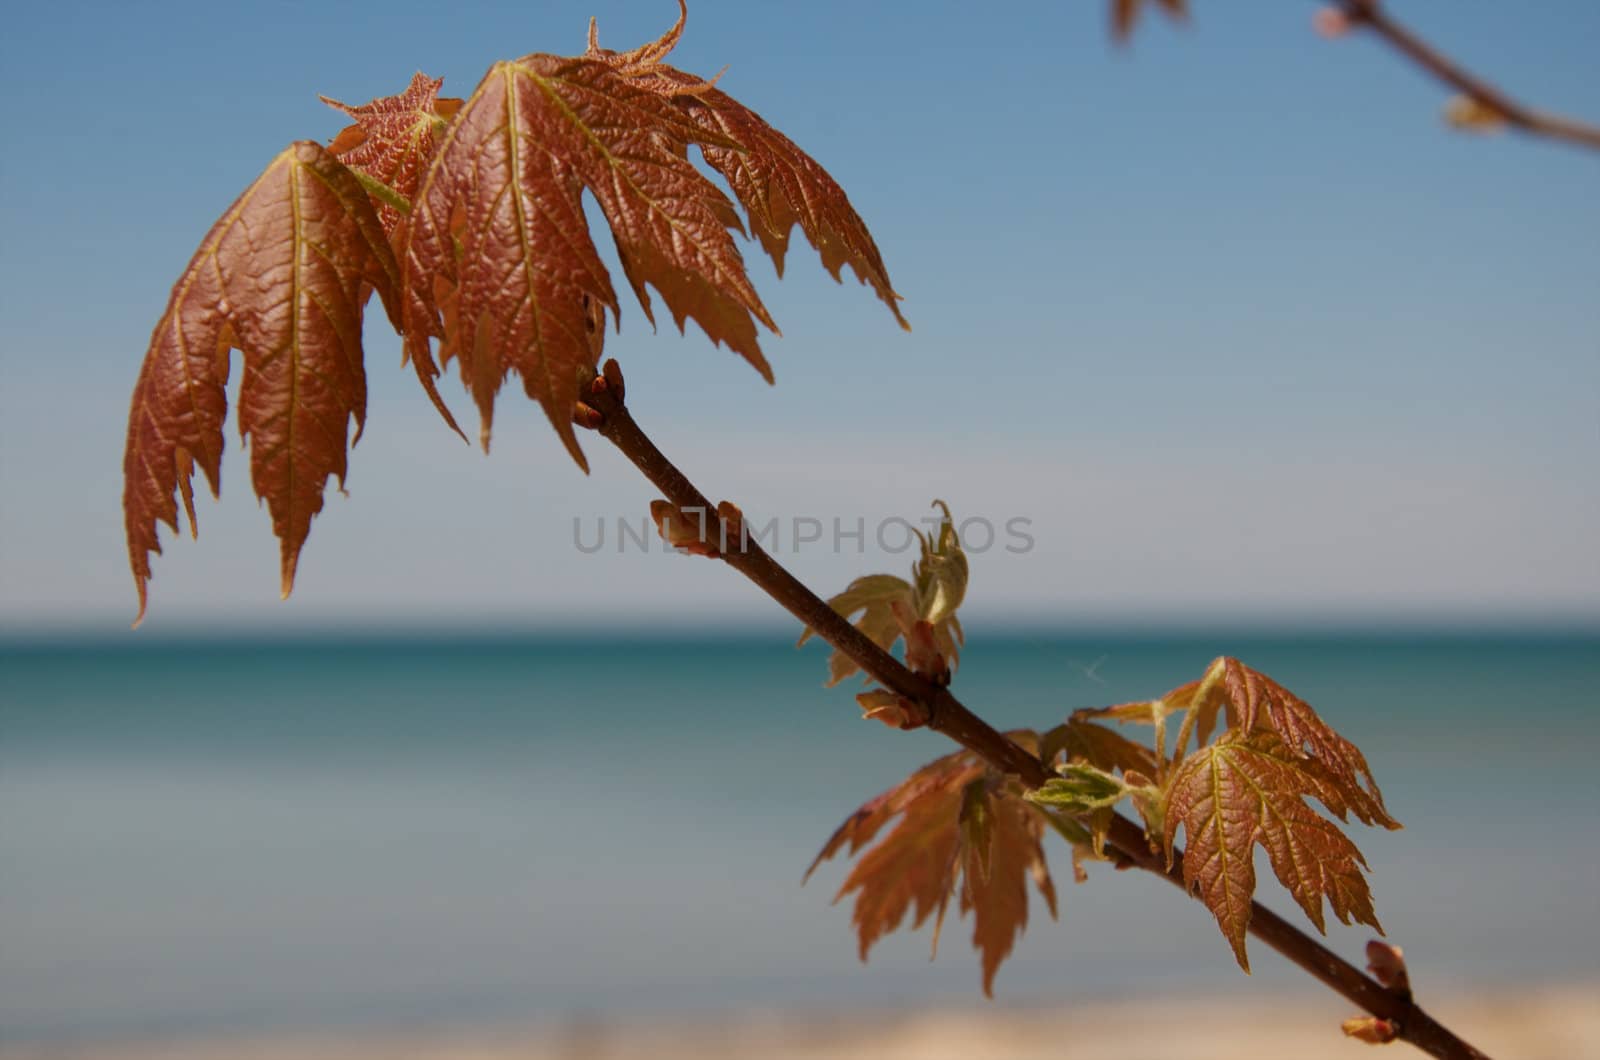 Wilted Maple leaves by tyroneburkemedia@gmail.com